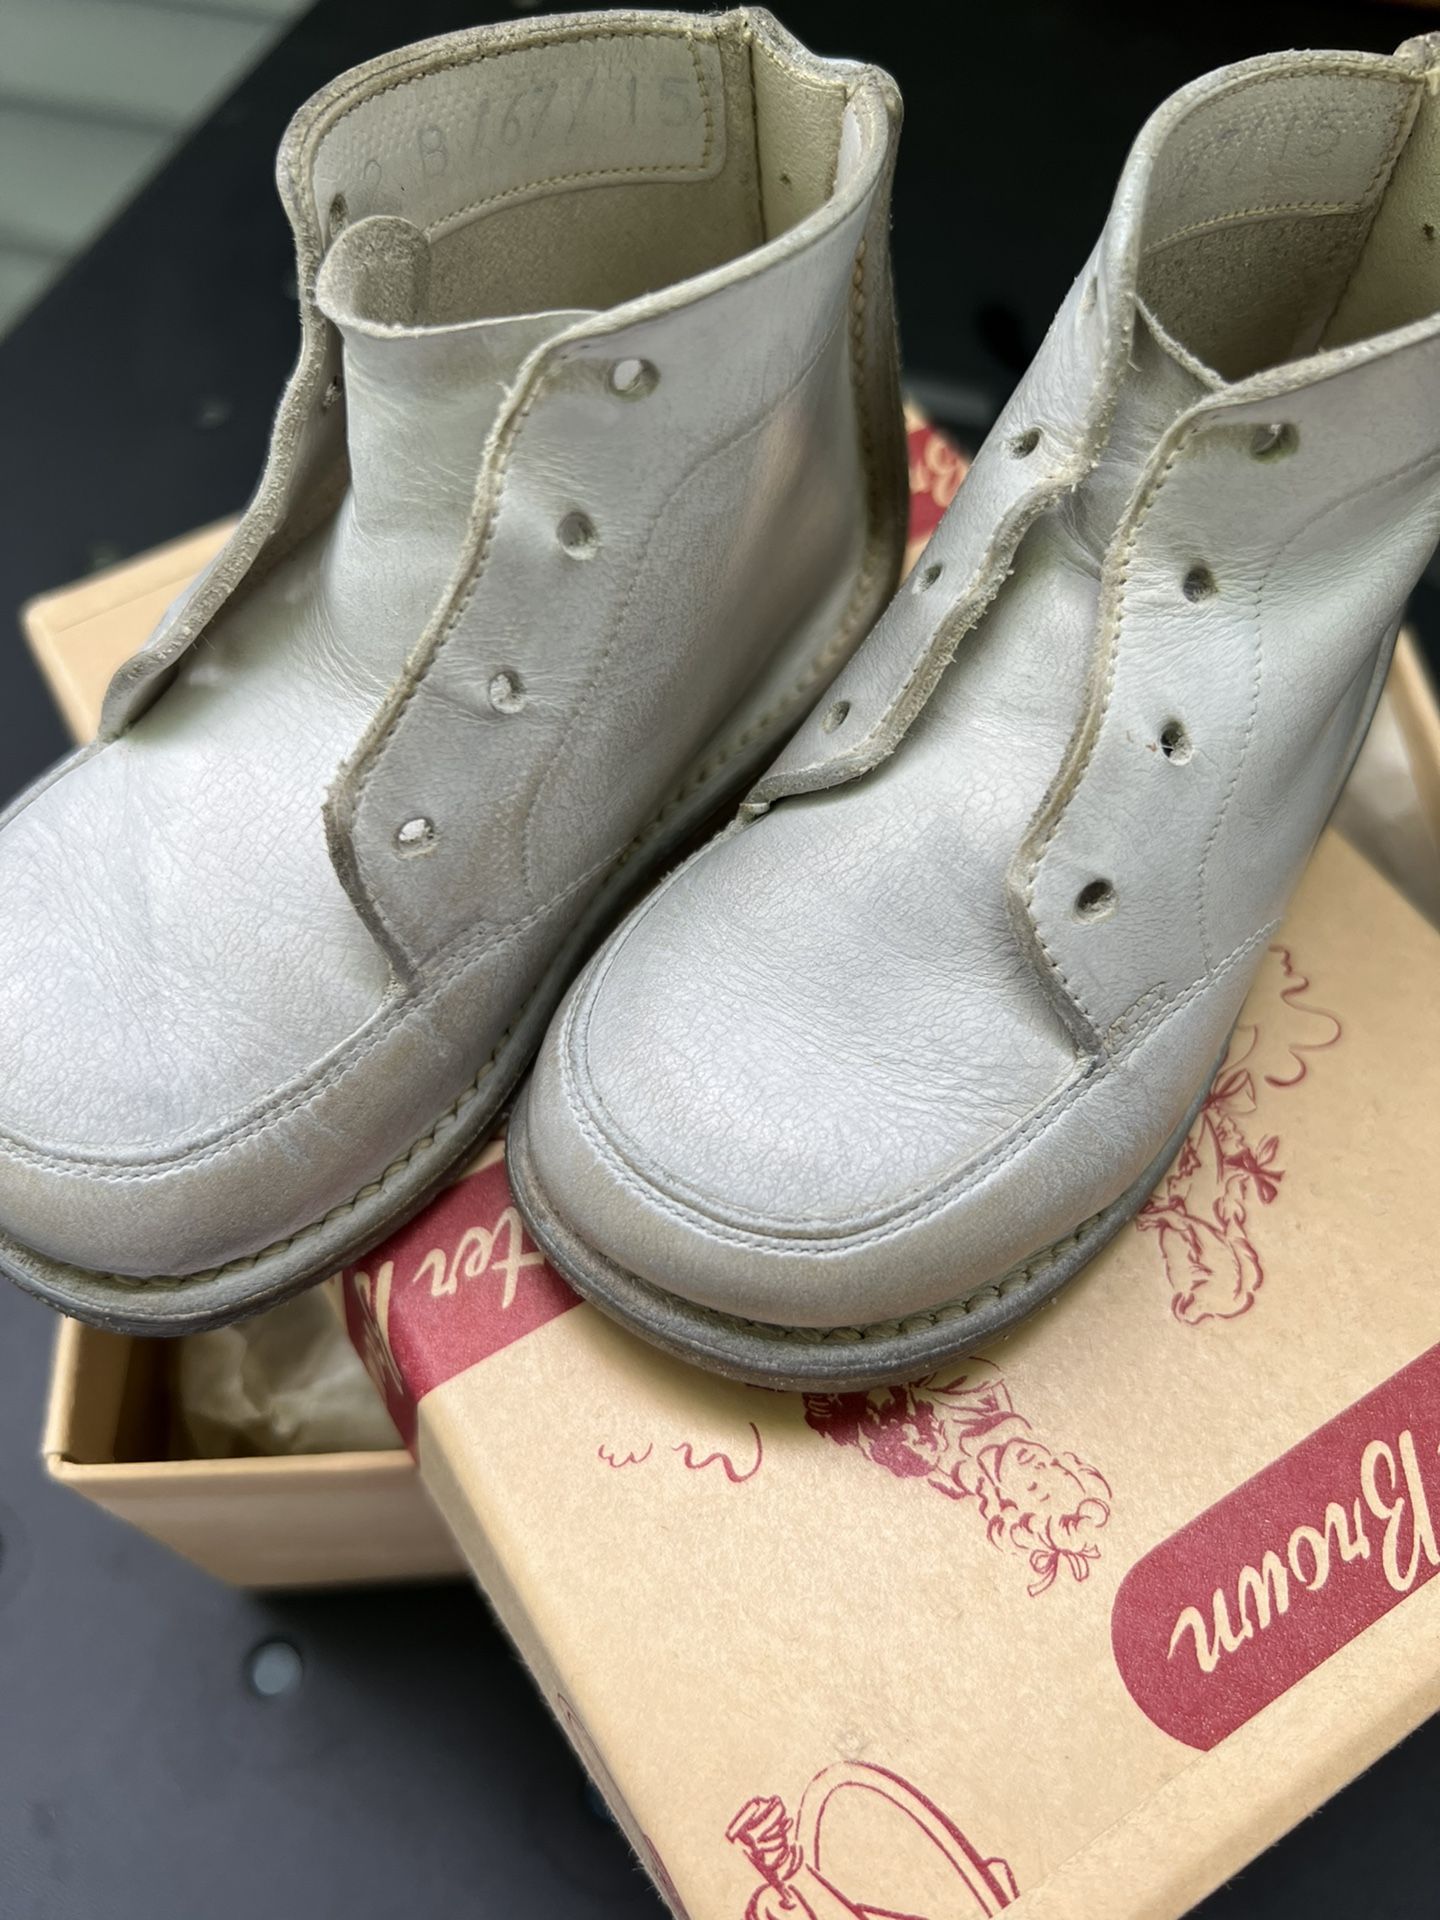 Vintage Buster Brown baby shoes